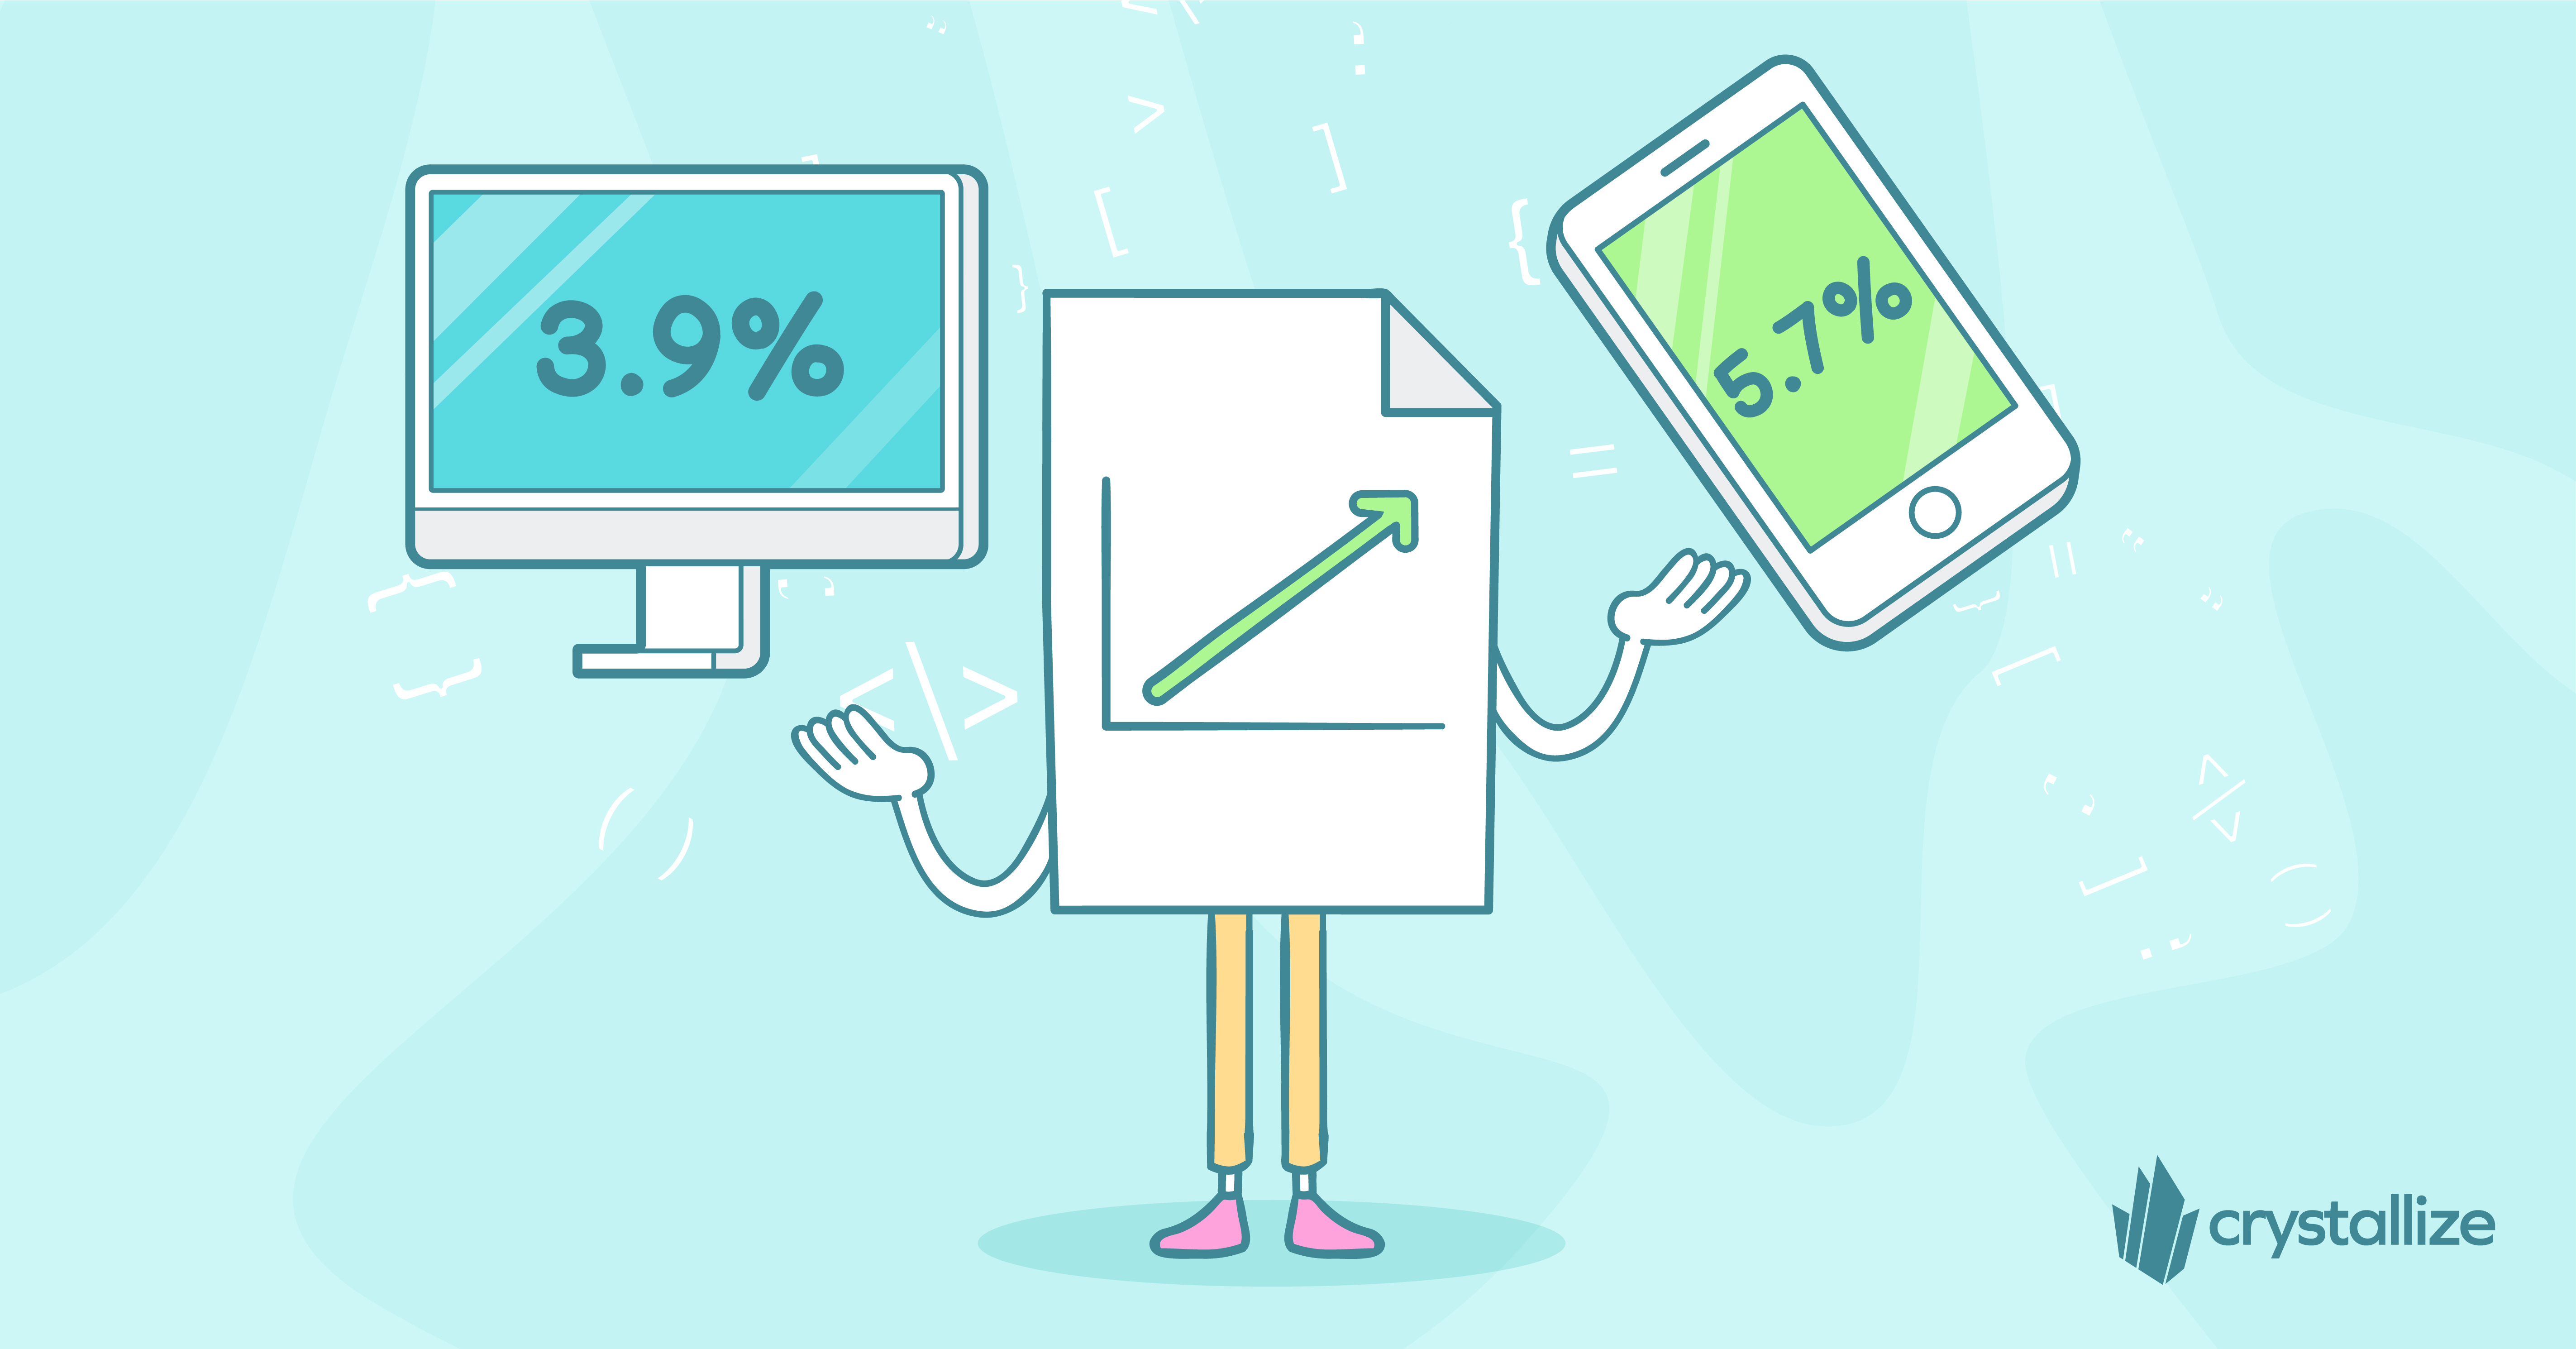 5.7% of customers convert on mobile devices, in contrast to only 3.9% on desktops.